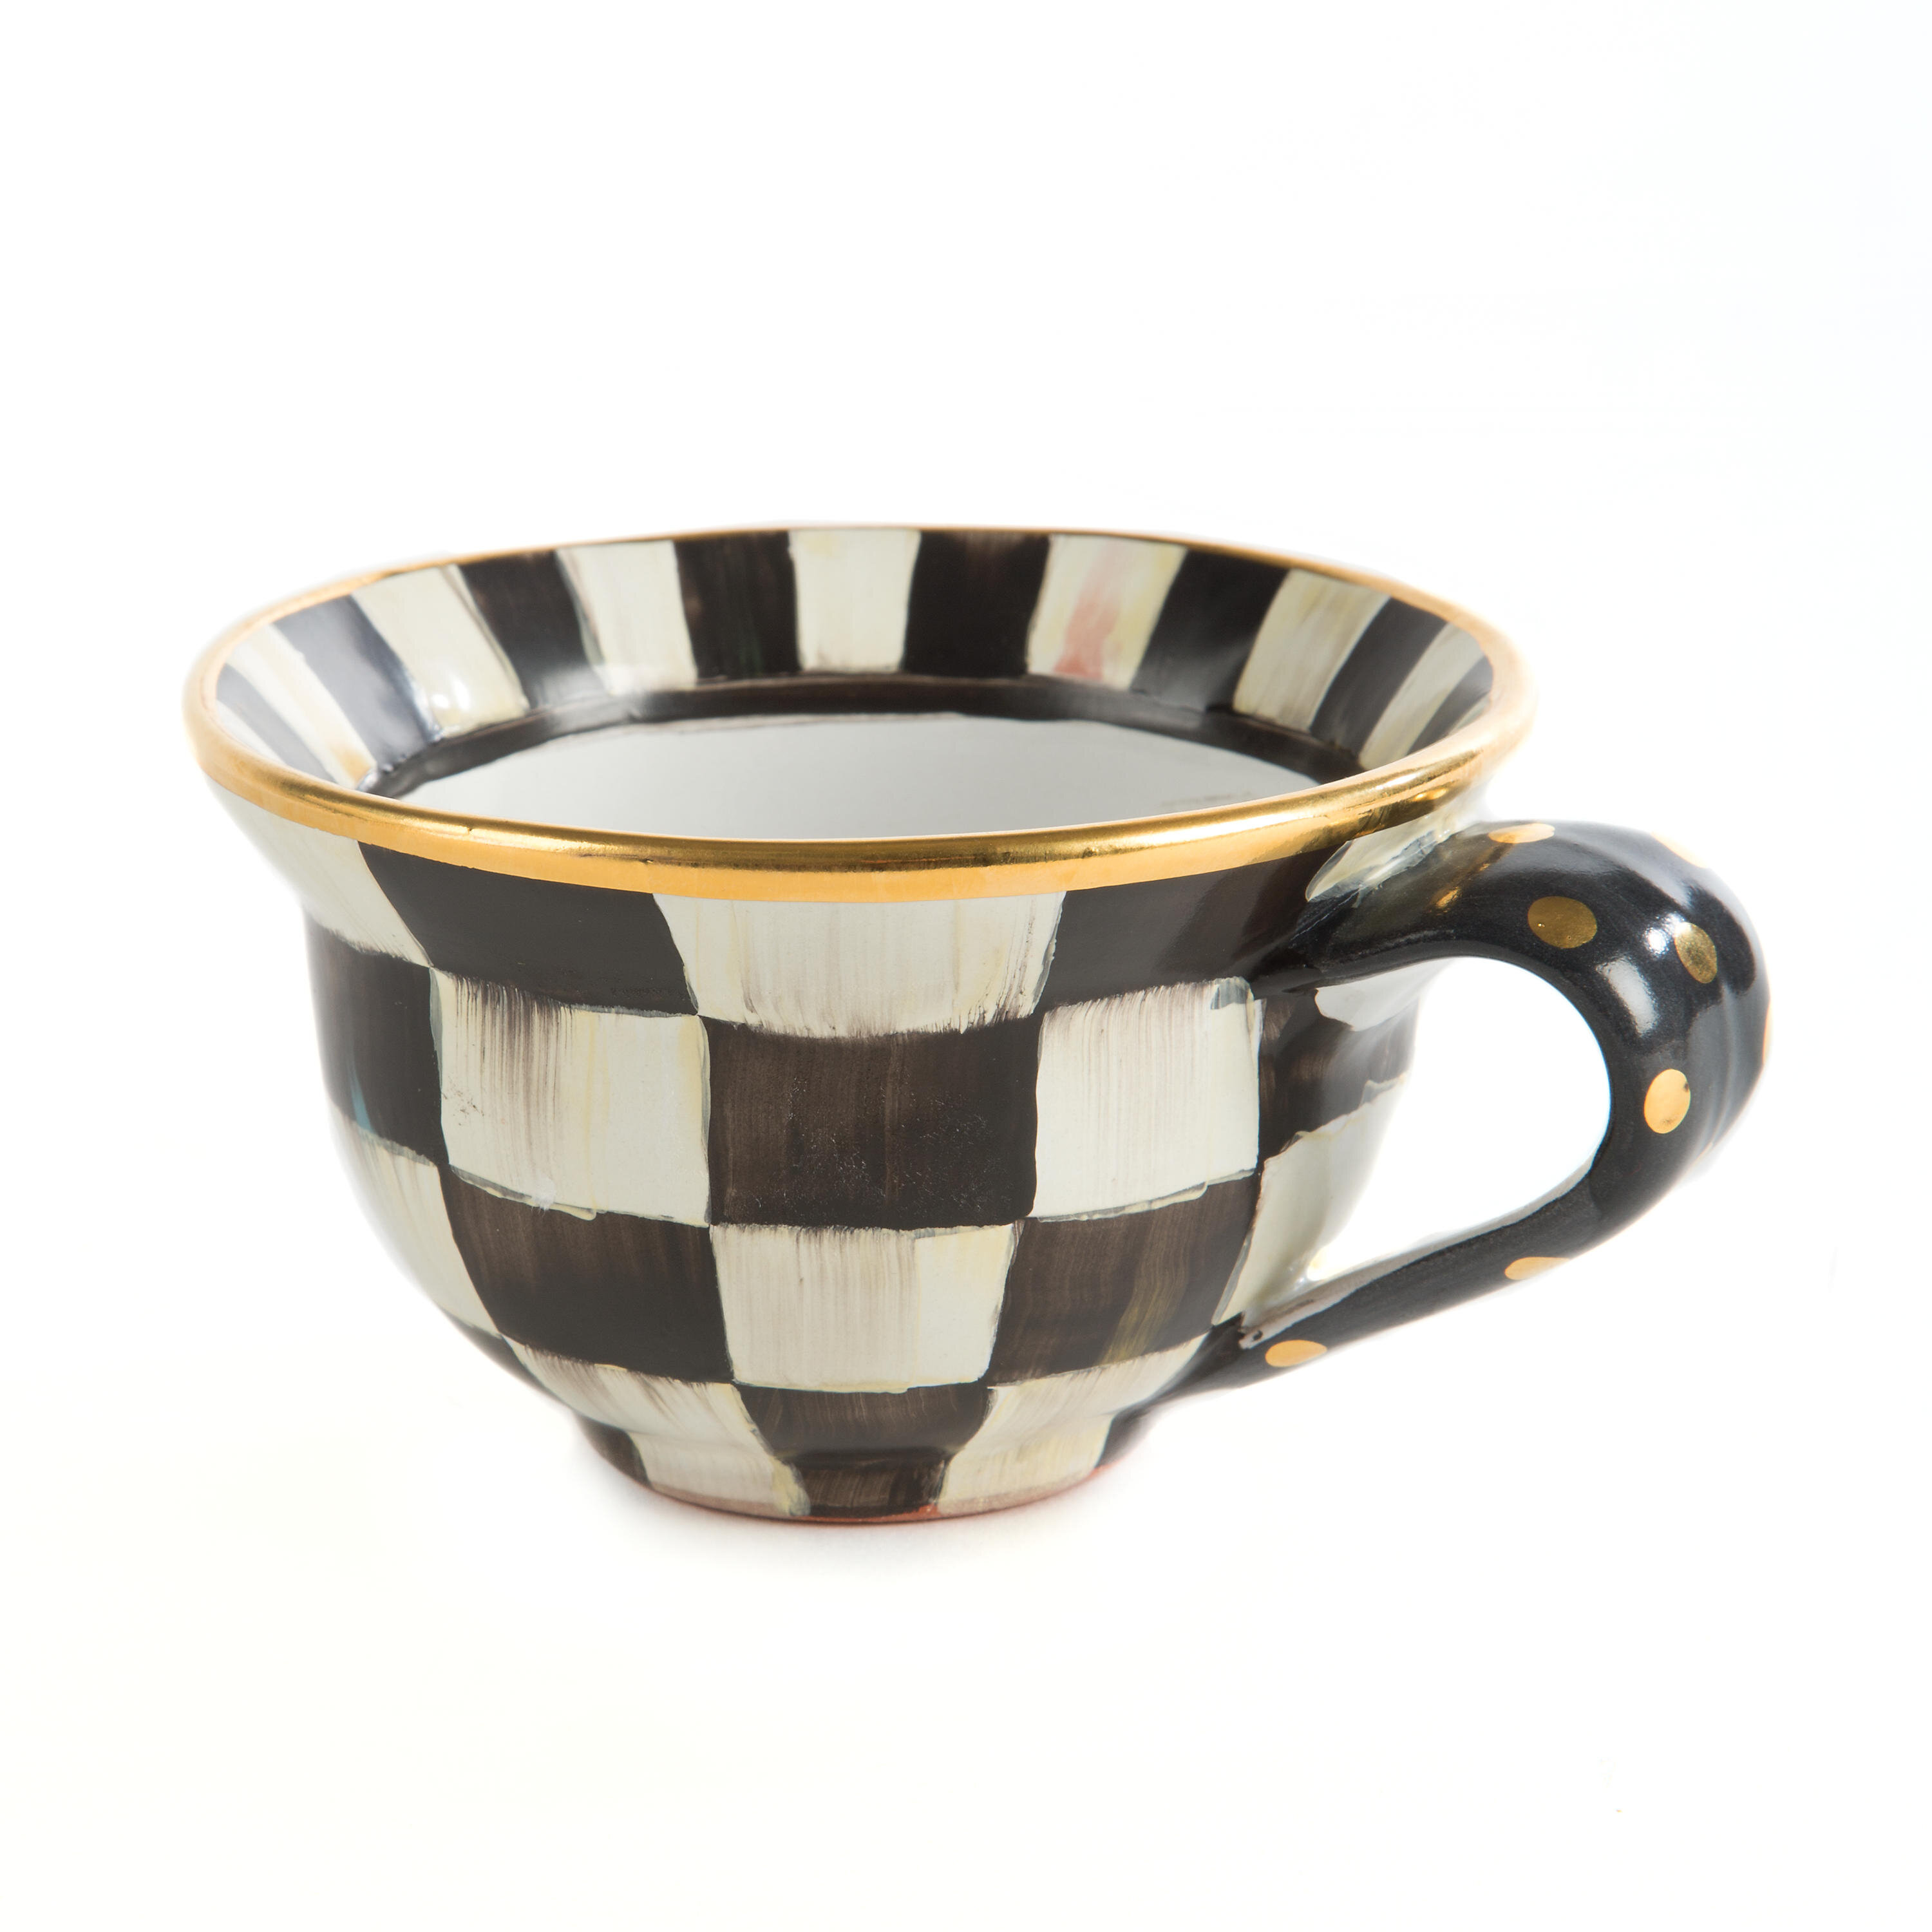 MacKenzie-Childs Courtly Check Coffee Cup Black-and-White Enamel Coffee Mug